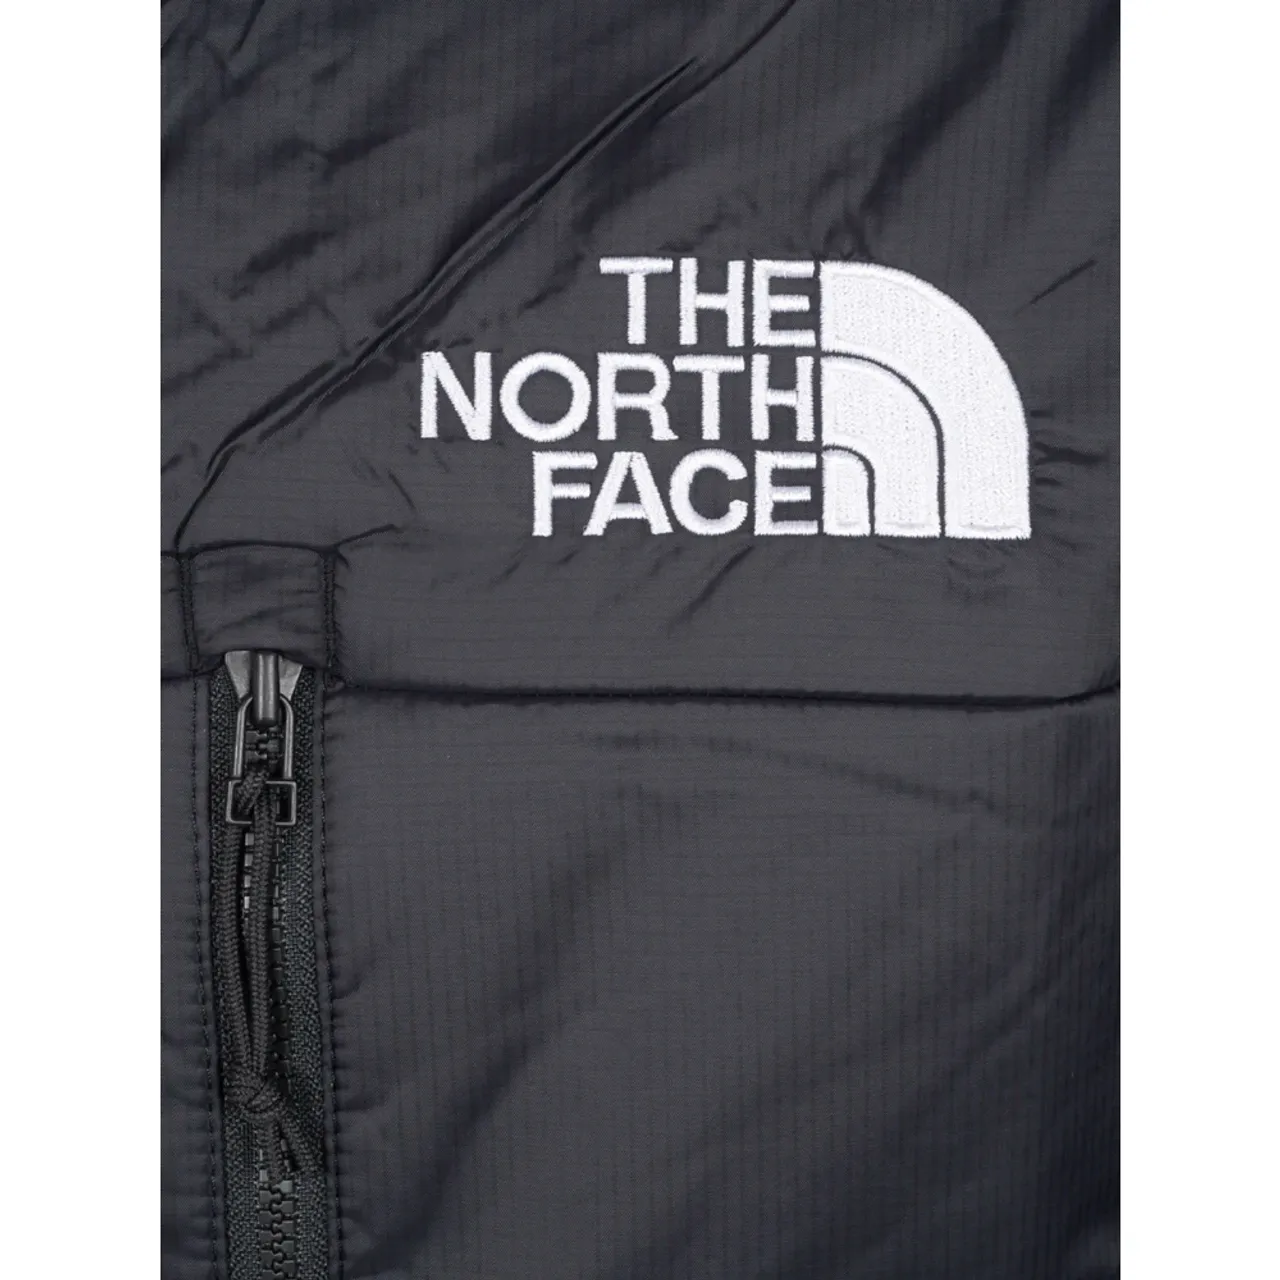 Schwarze Jacken - Himalayan Light Synth Hoodie The North Face